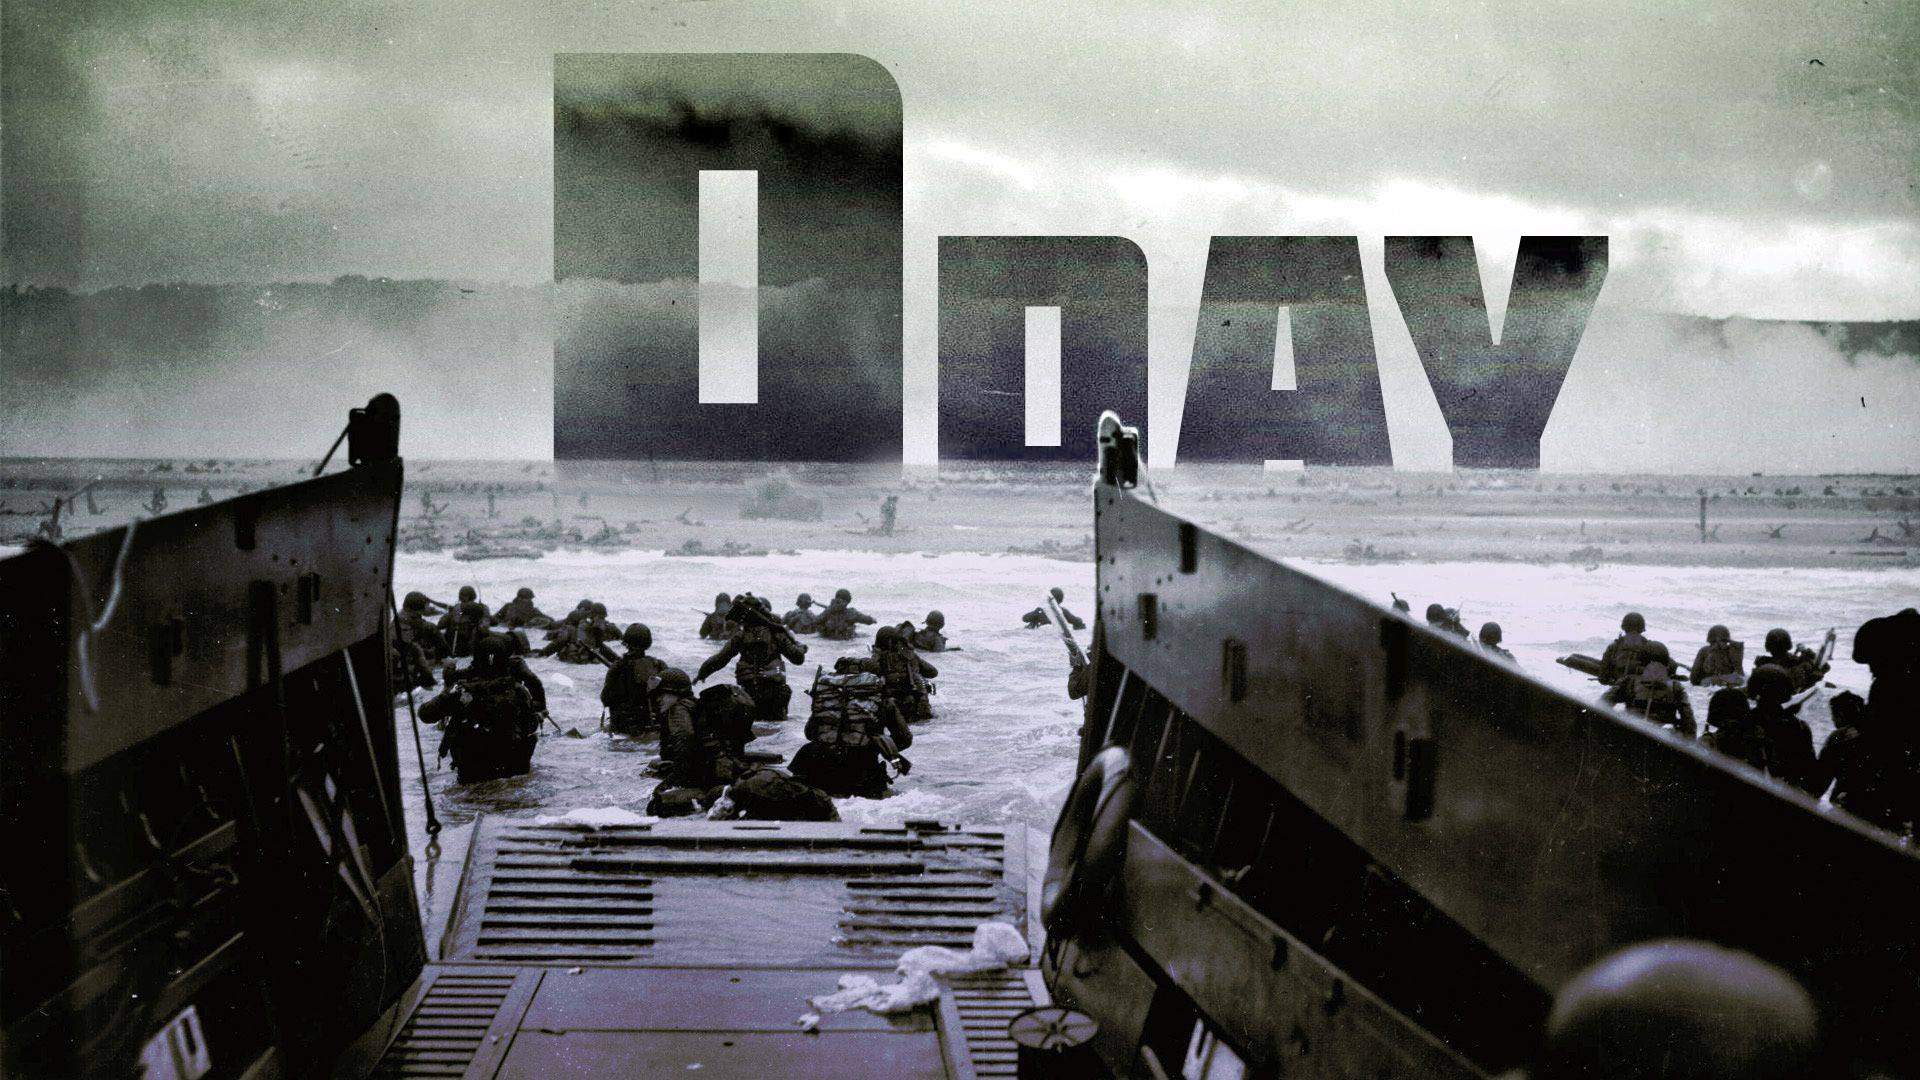 WWII D Day Soldiers military battle wallpaper 1920x1080 197373 1920x1080